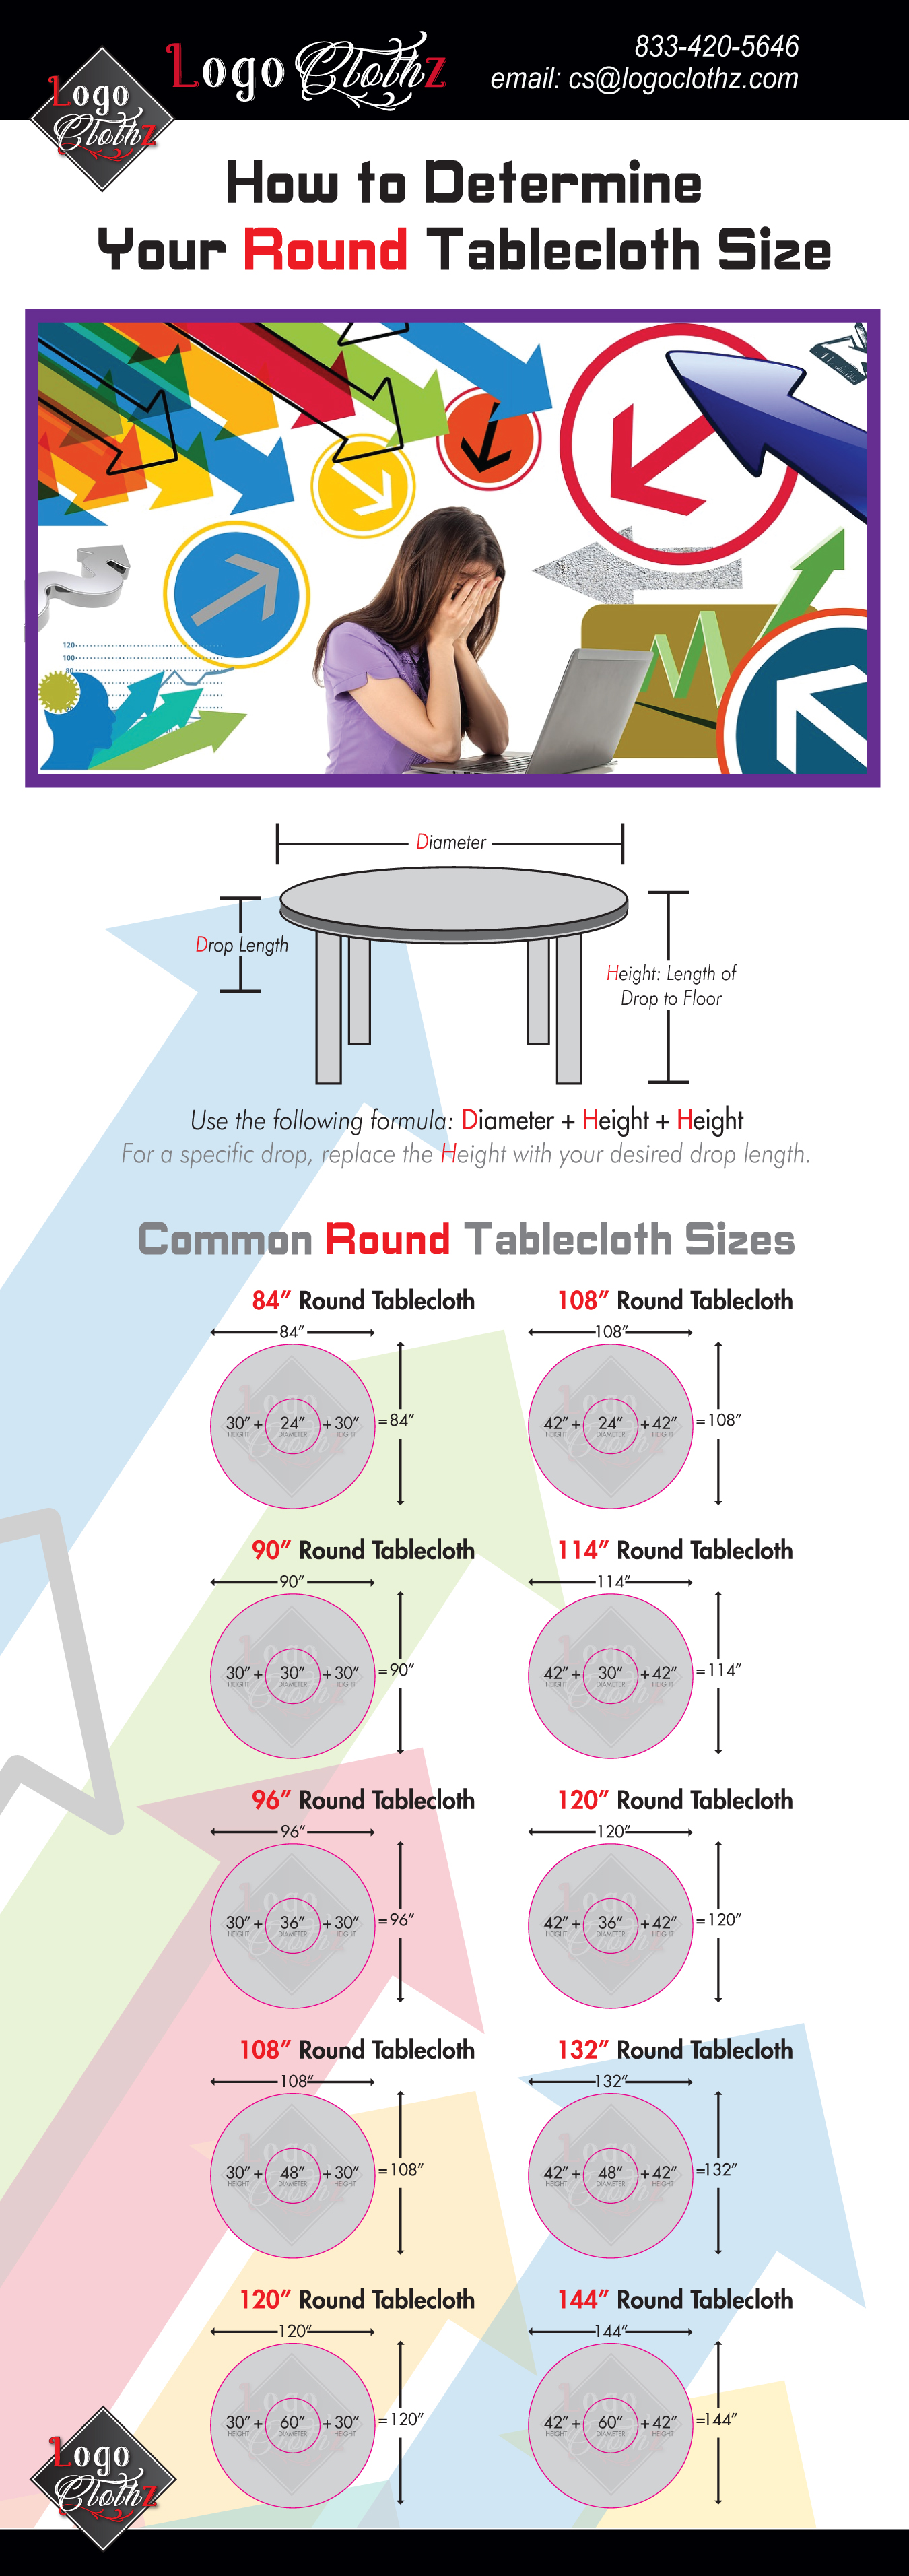 size-guide-round-printed-tablecloths.jpg